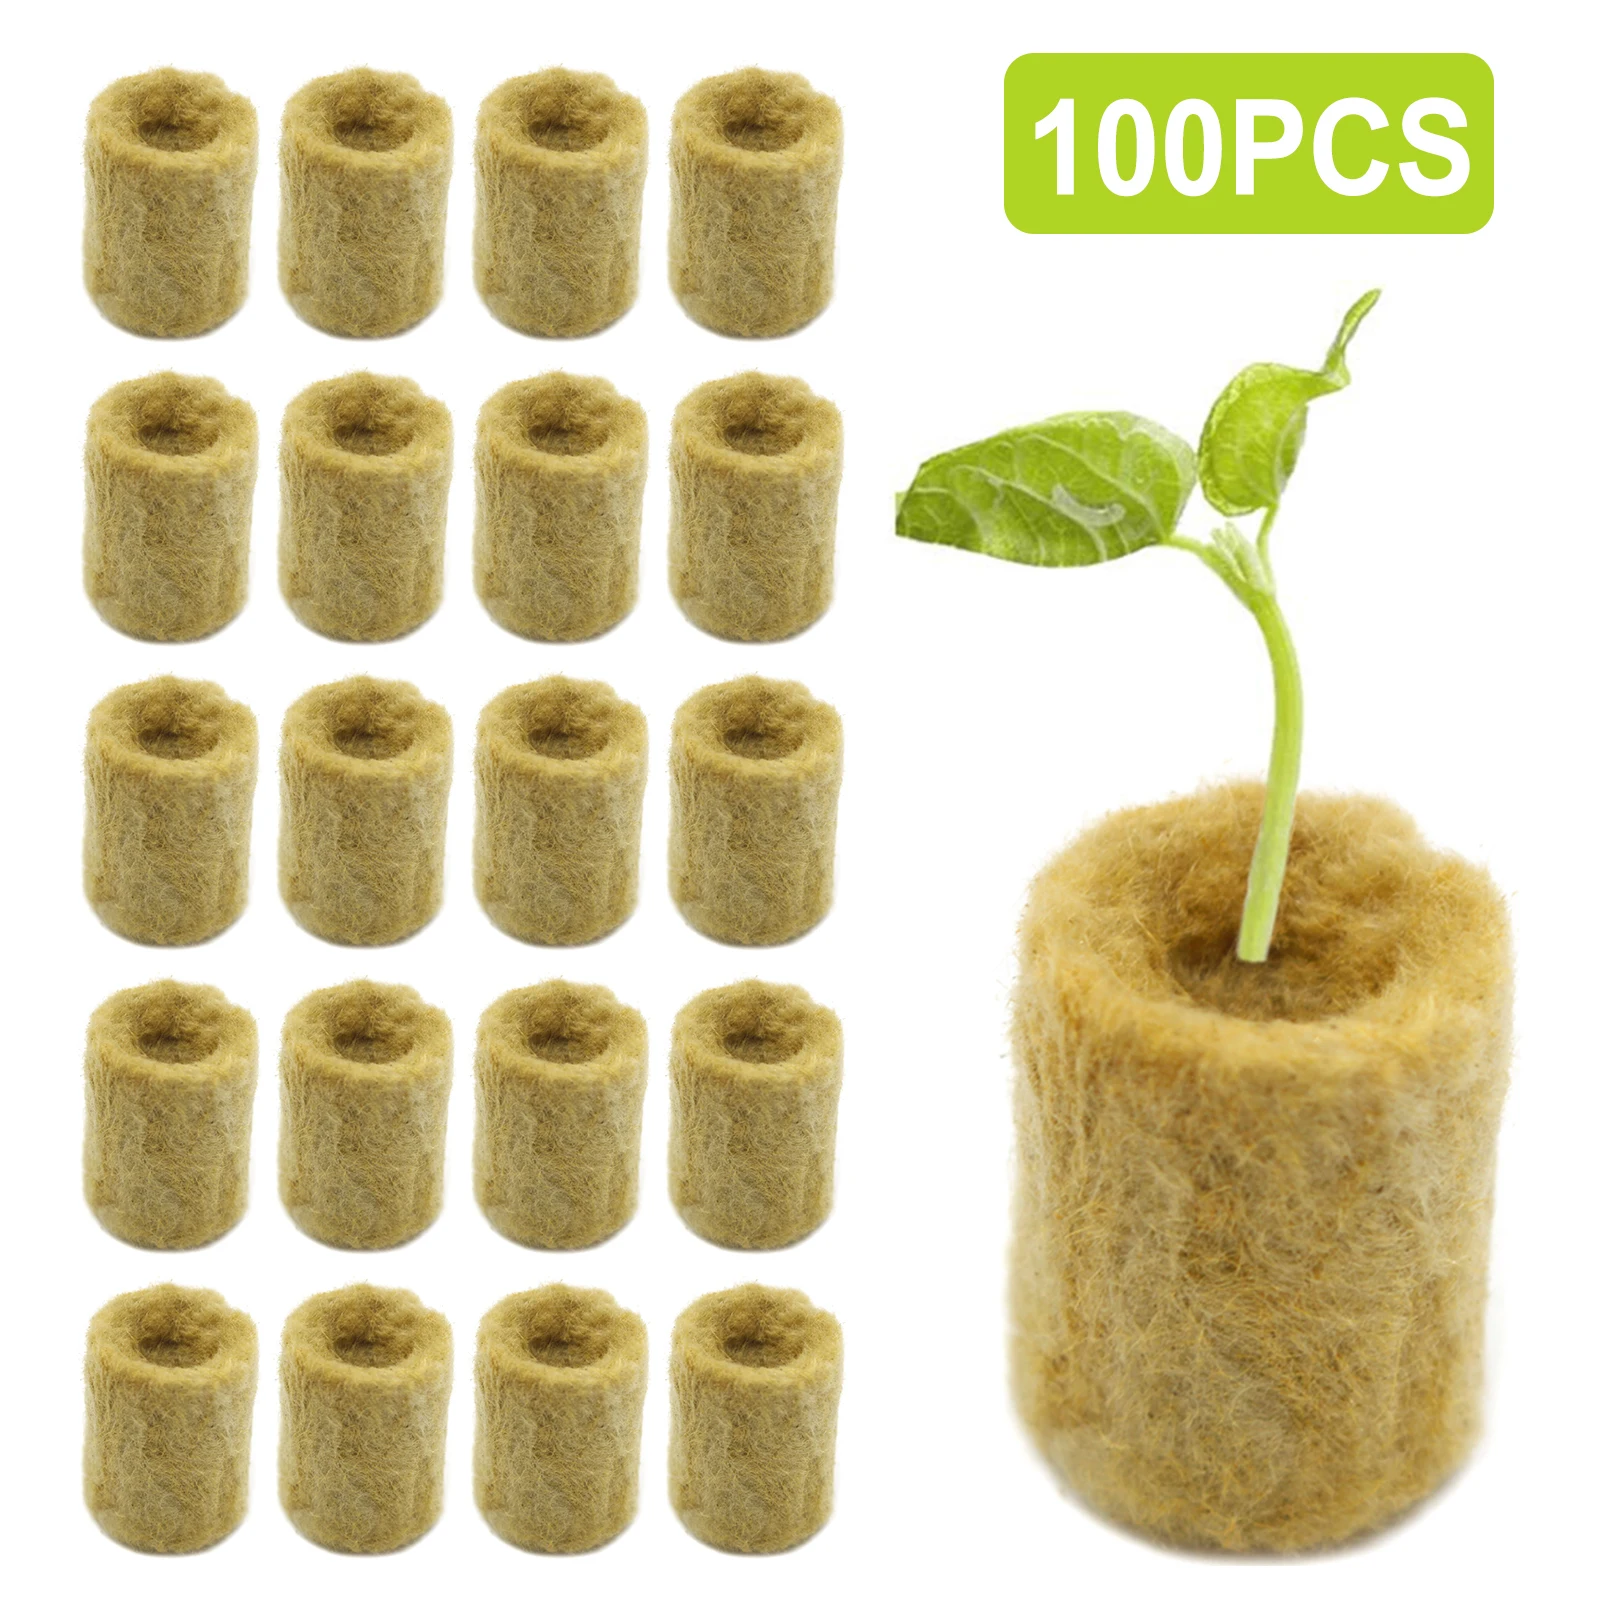 

27*20mm 100Pcs Soilless Culture Substrate for Water Cultivation Seedlings Sowing Rock Wool Plug Nursery Pot Garden Tools